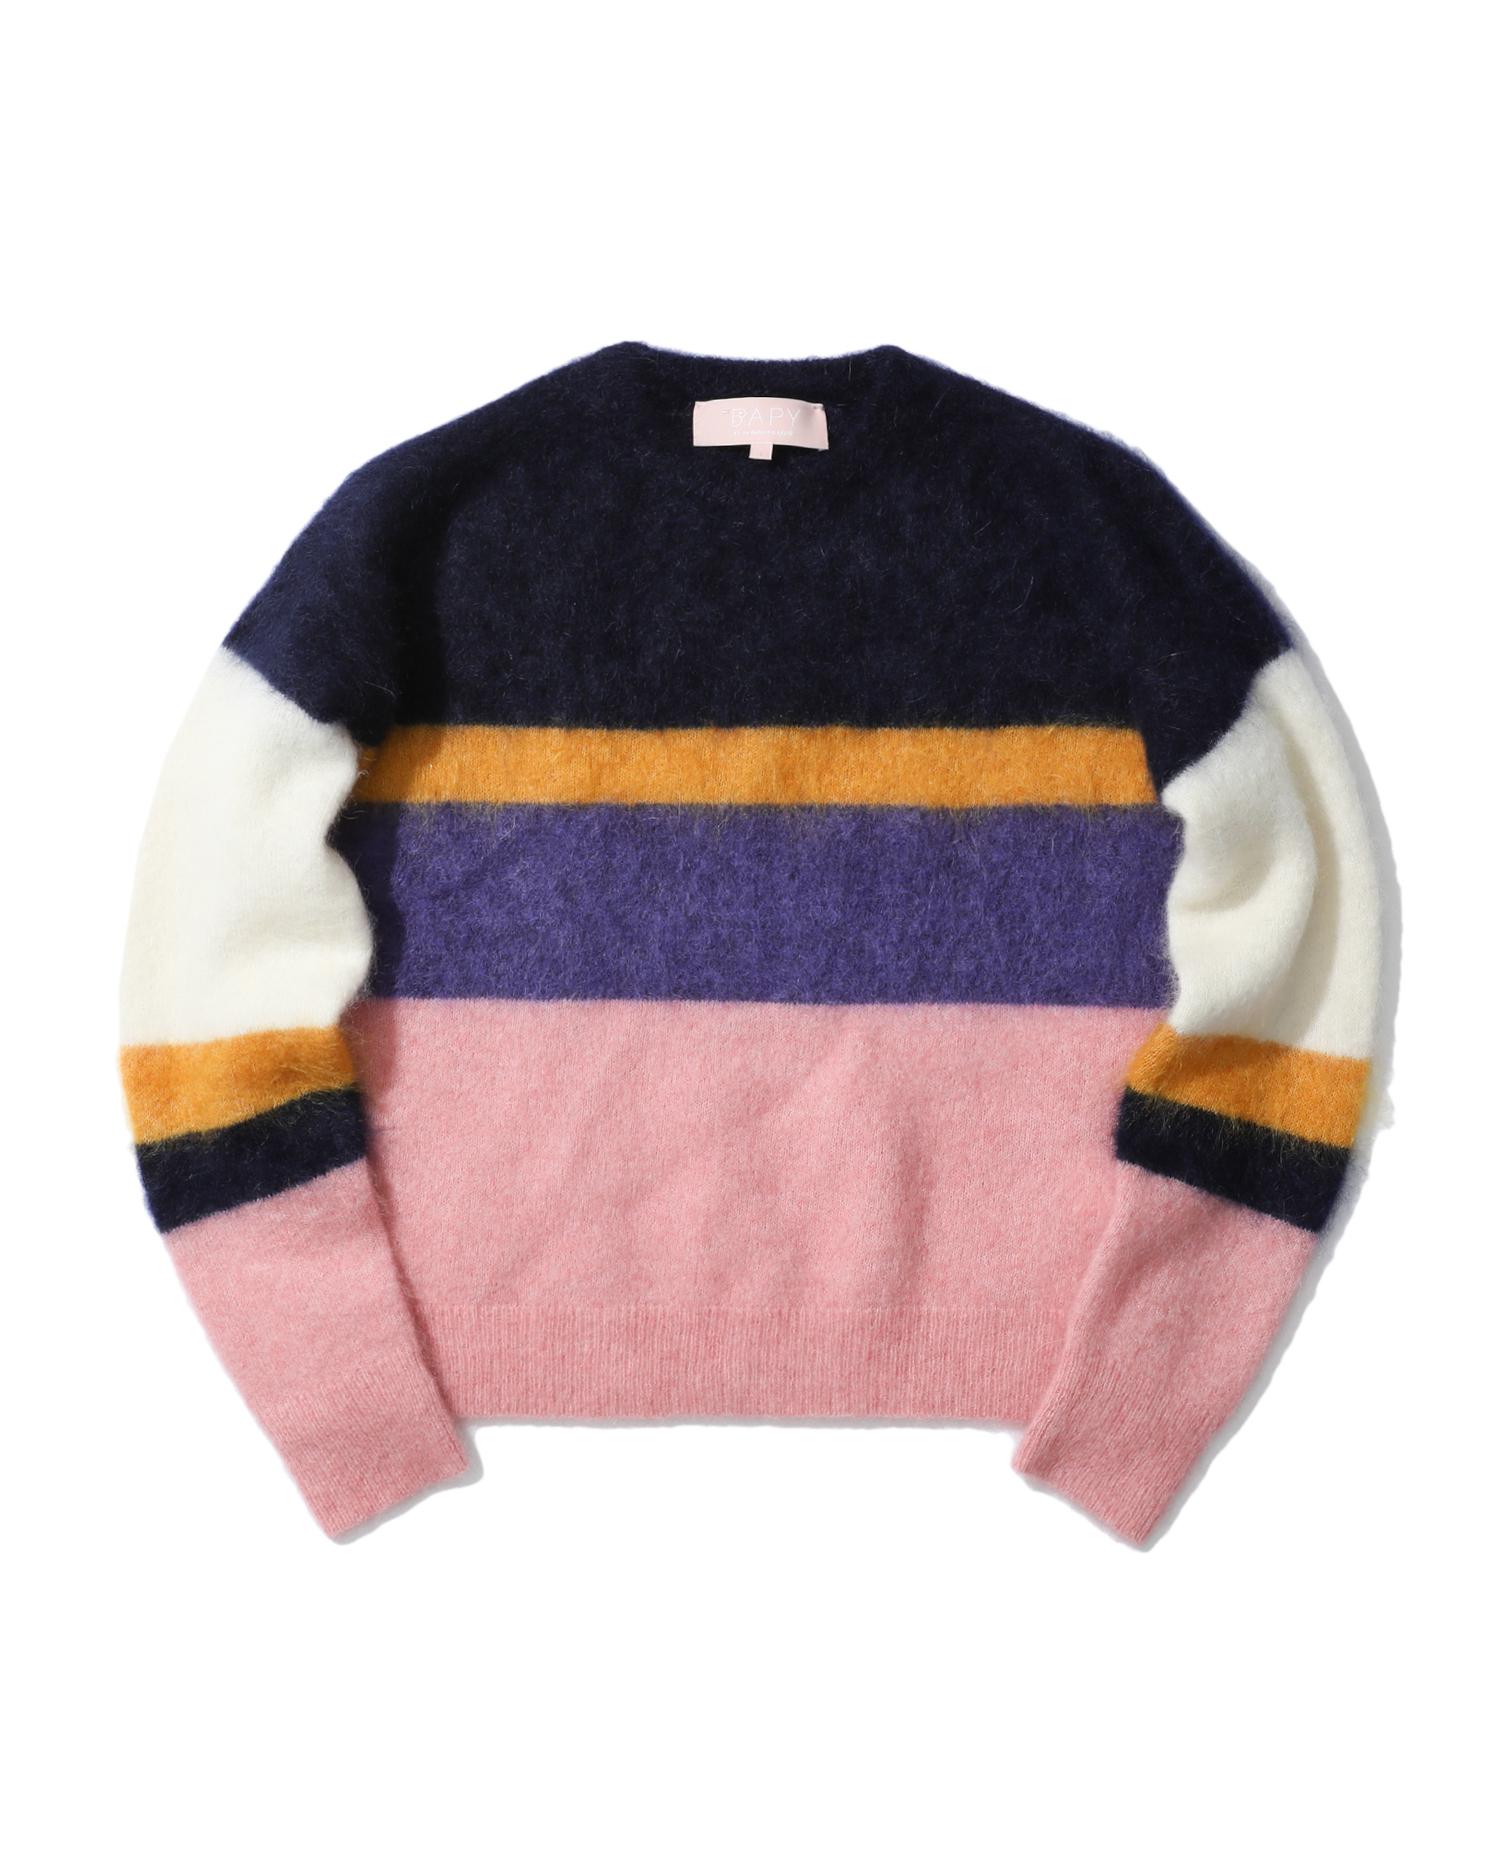 Colour block sweater by BAPY